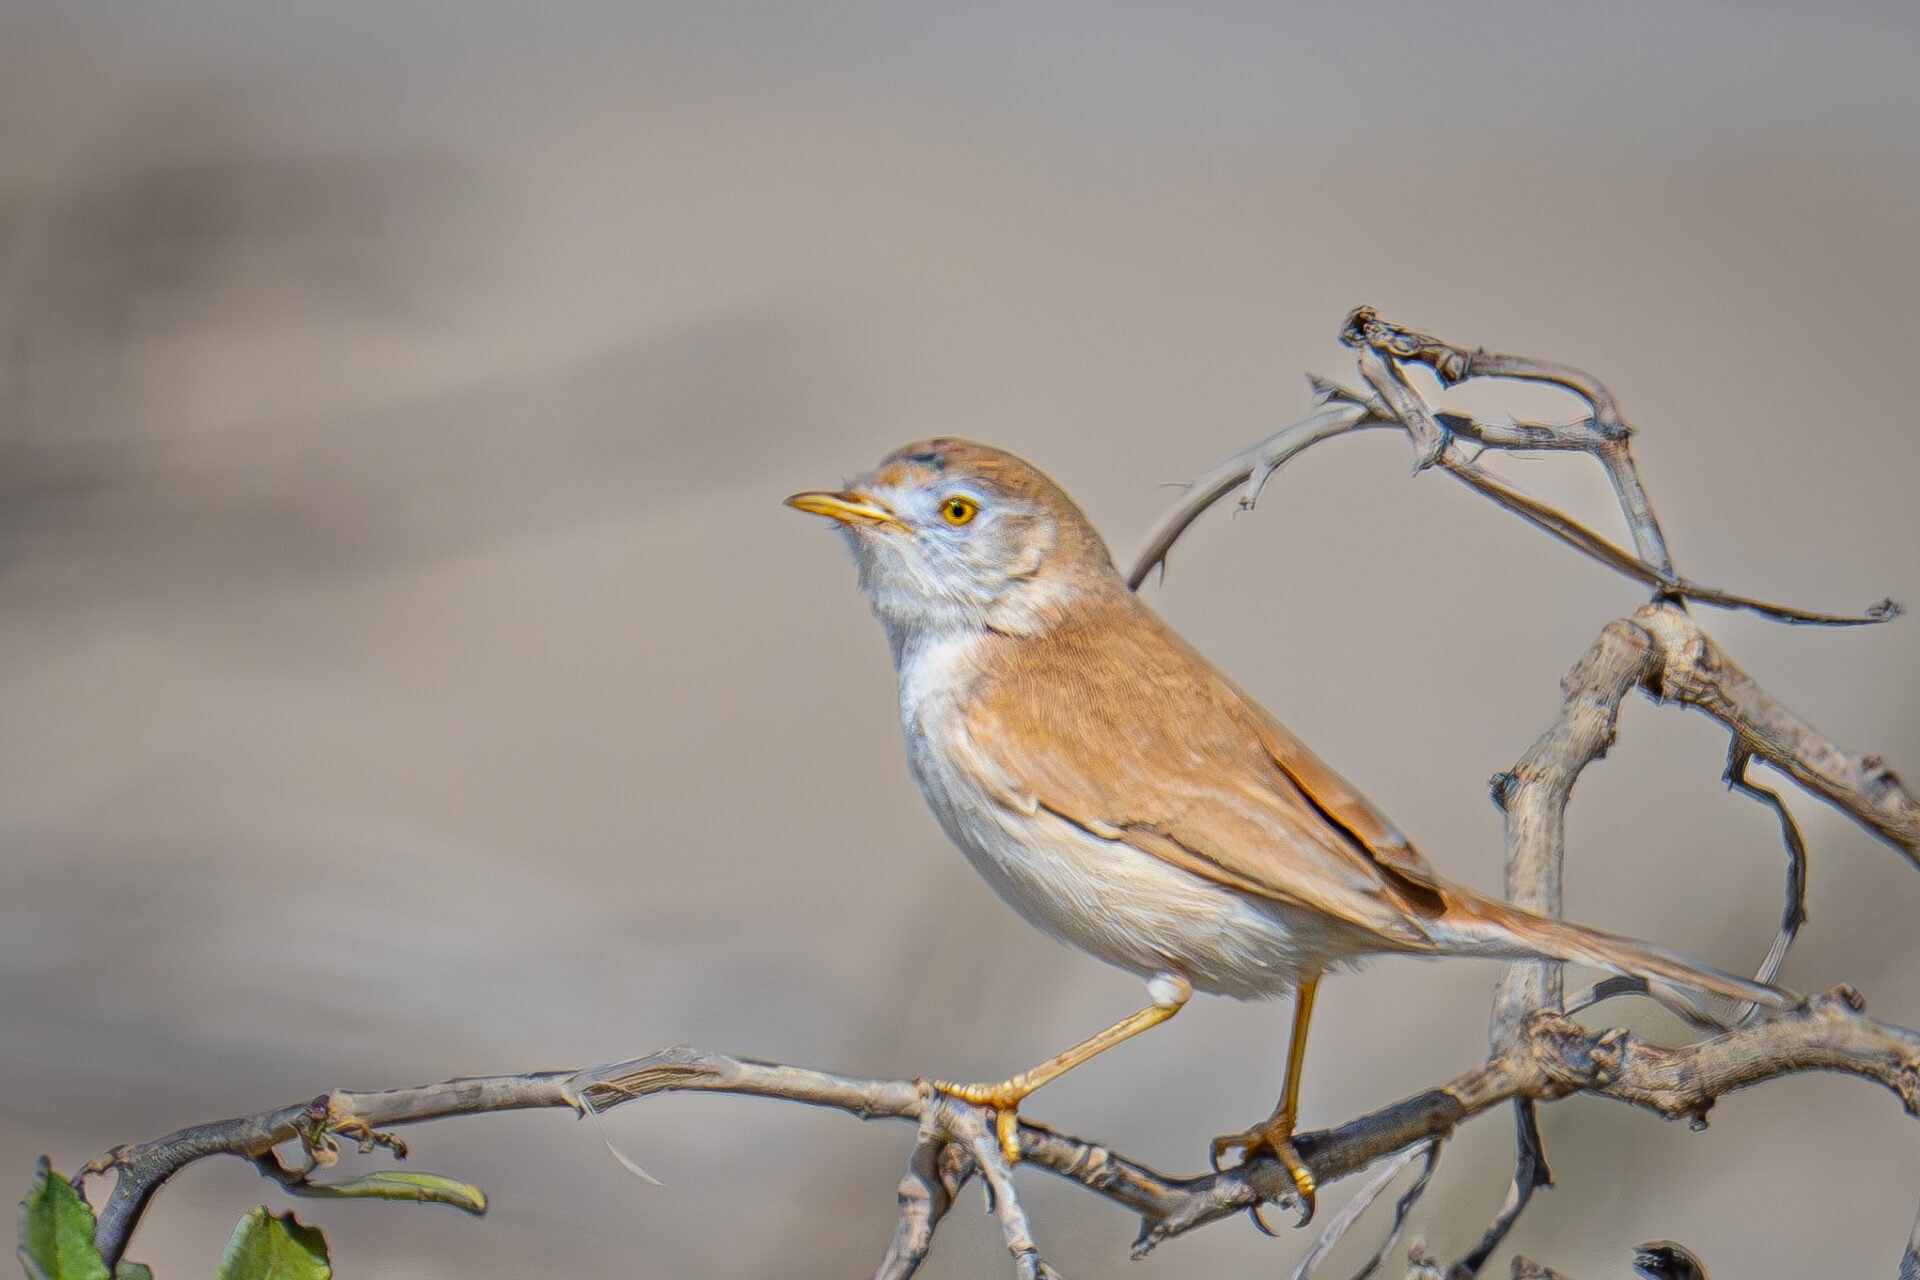 The African warbler, perched on a twig in Haifa. Photo by Oriel Levy.